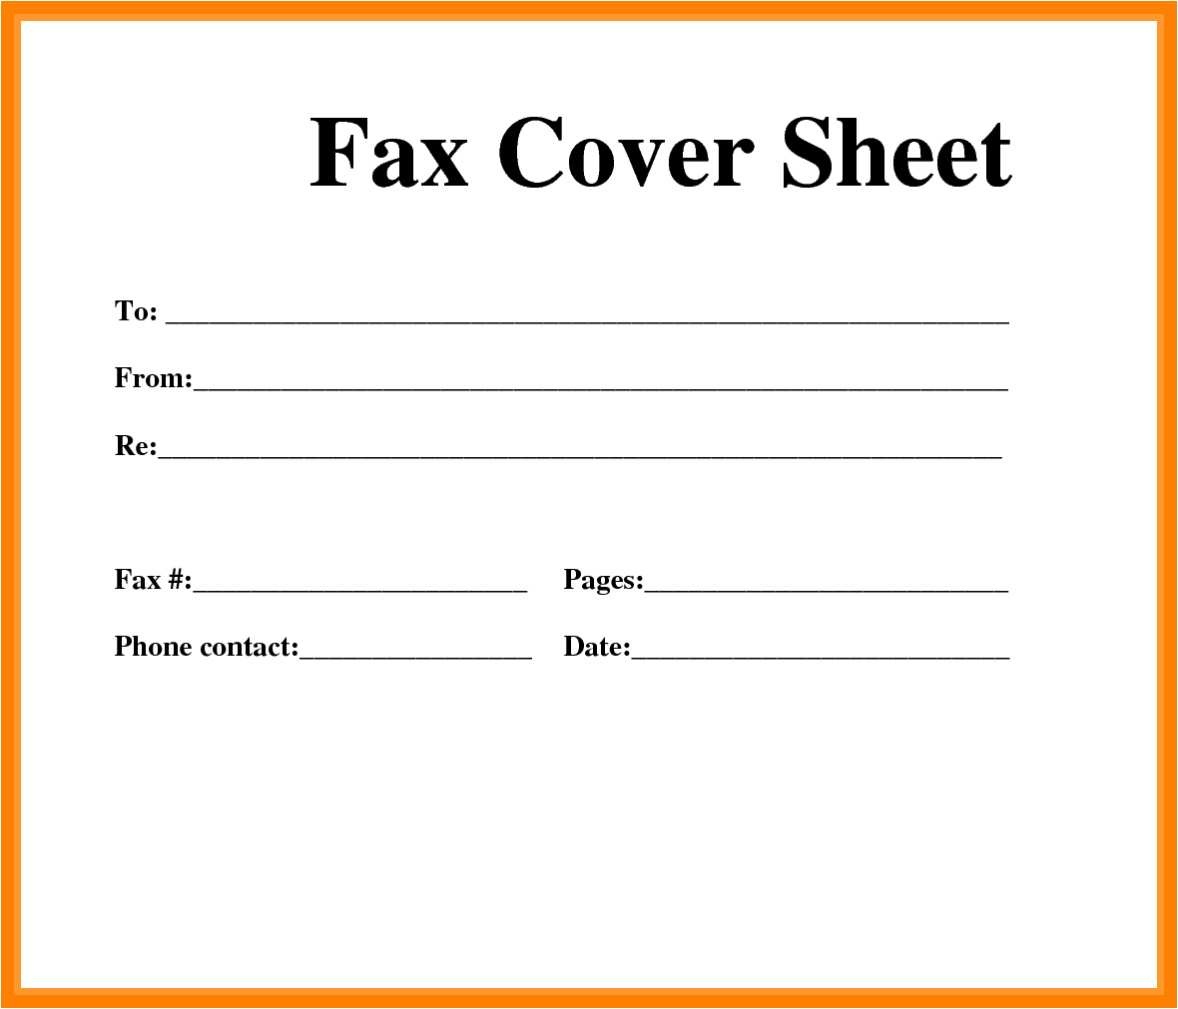 53 Fresh Fax Cover Sheet Template Word 2013 - All About Resume - Free Printable Cover Letter For Fax